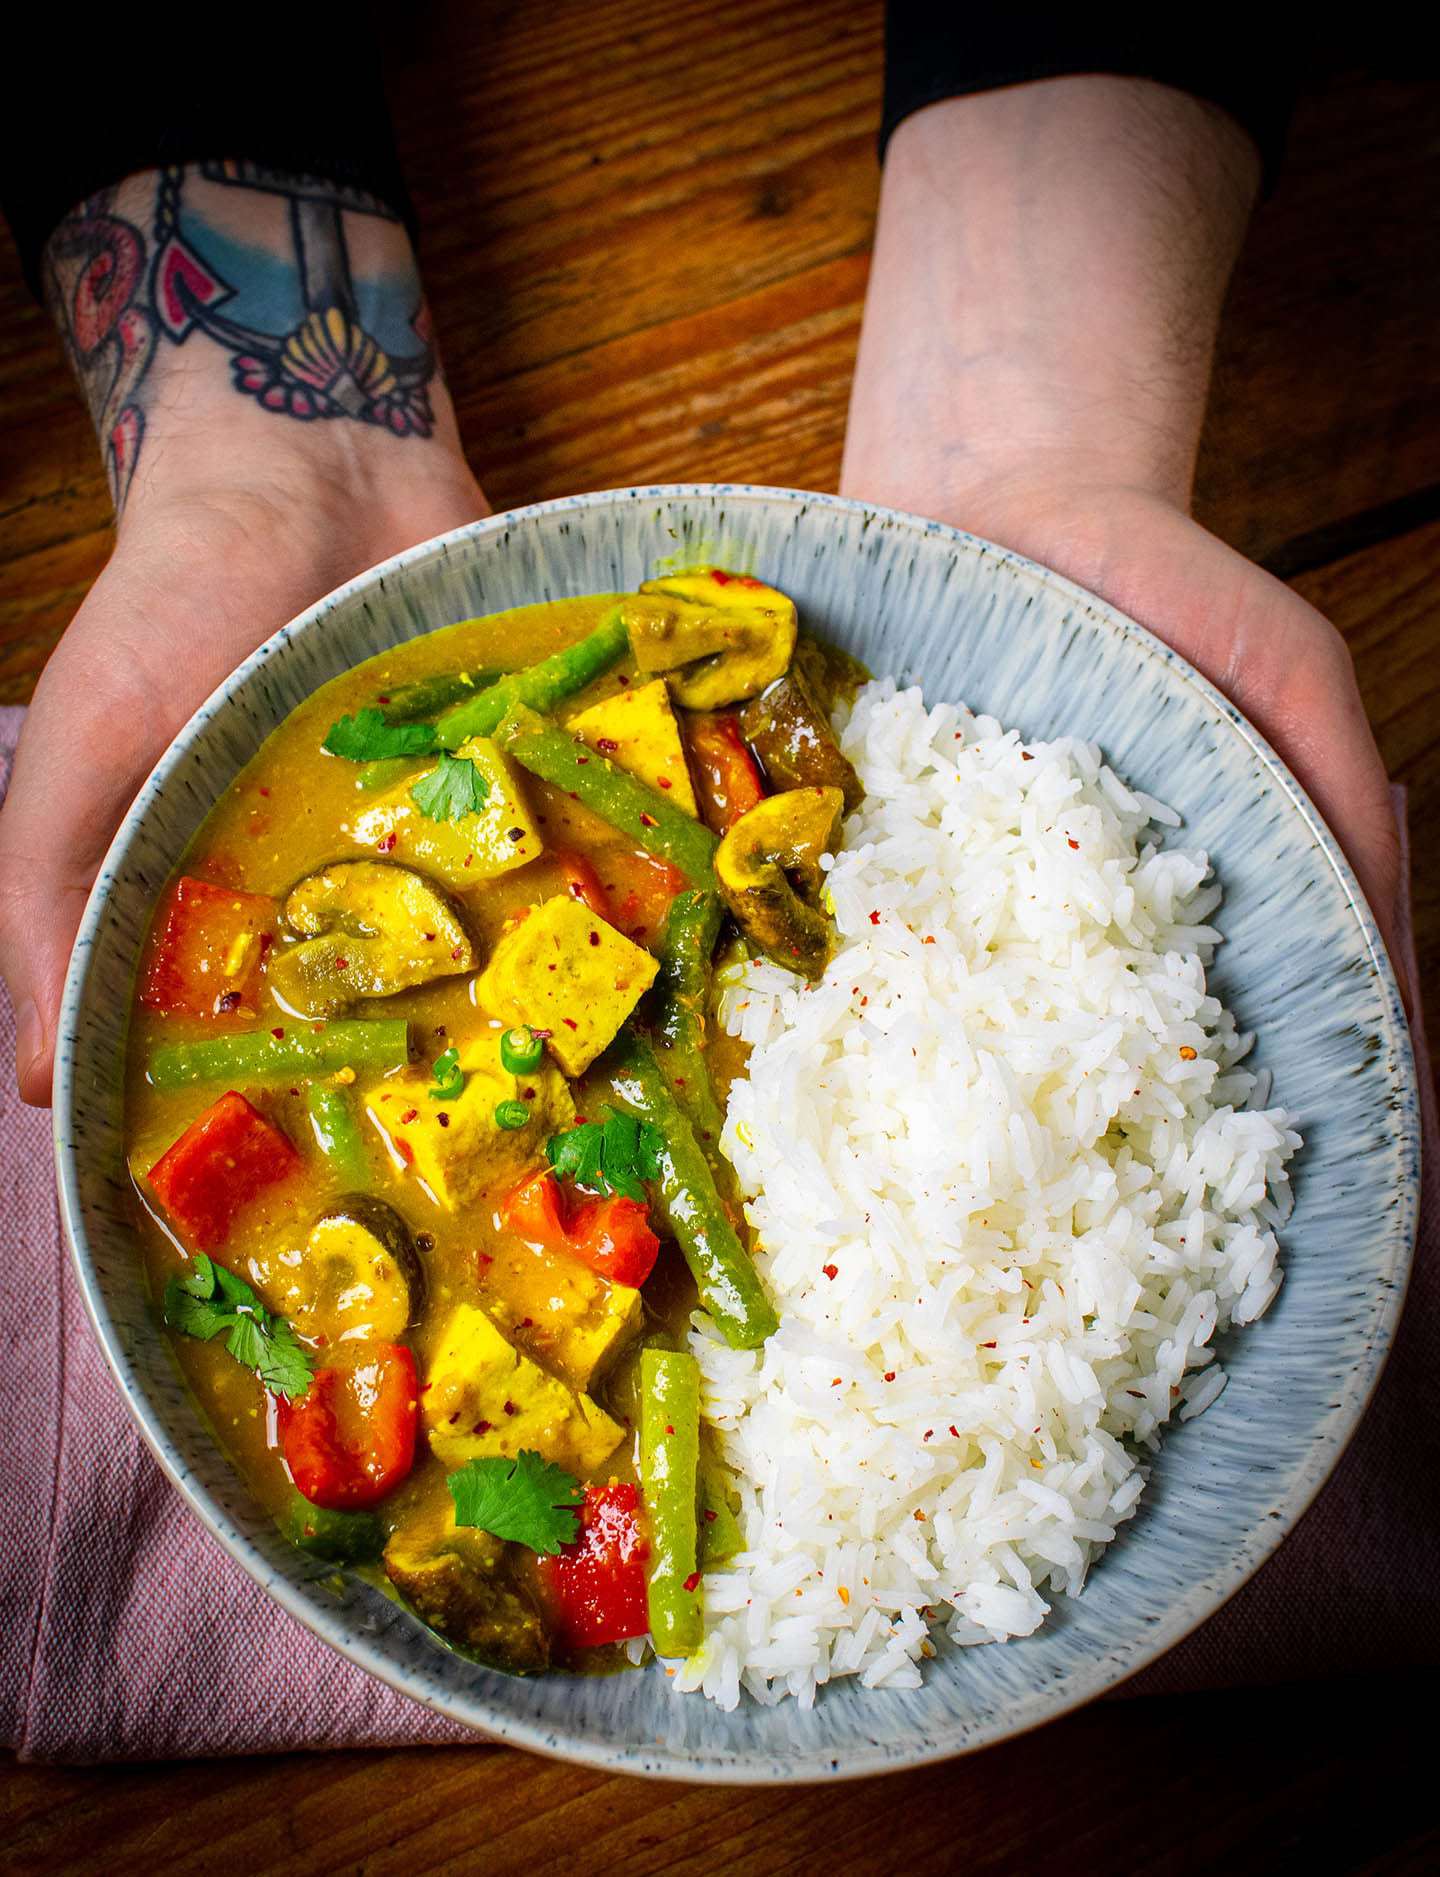 Thai tofu yellow curry being held up to the camera by two hands